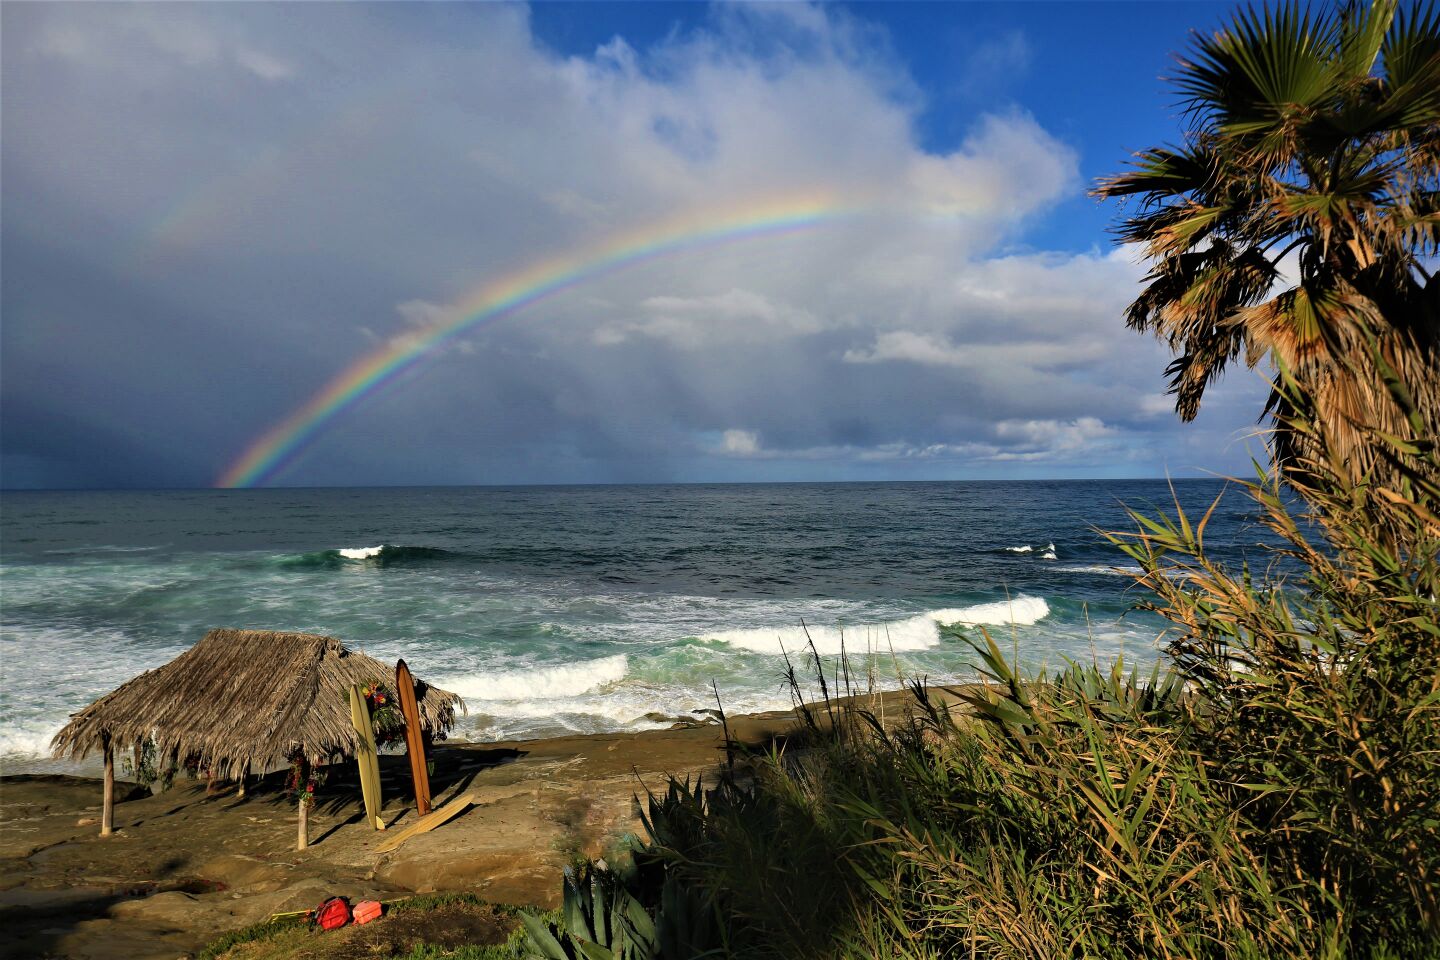 A rainbow adds to the scenery beyond the Windansea Beach surf shack.